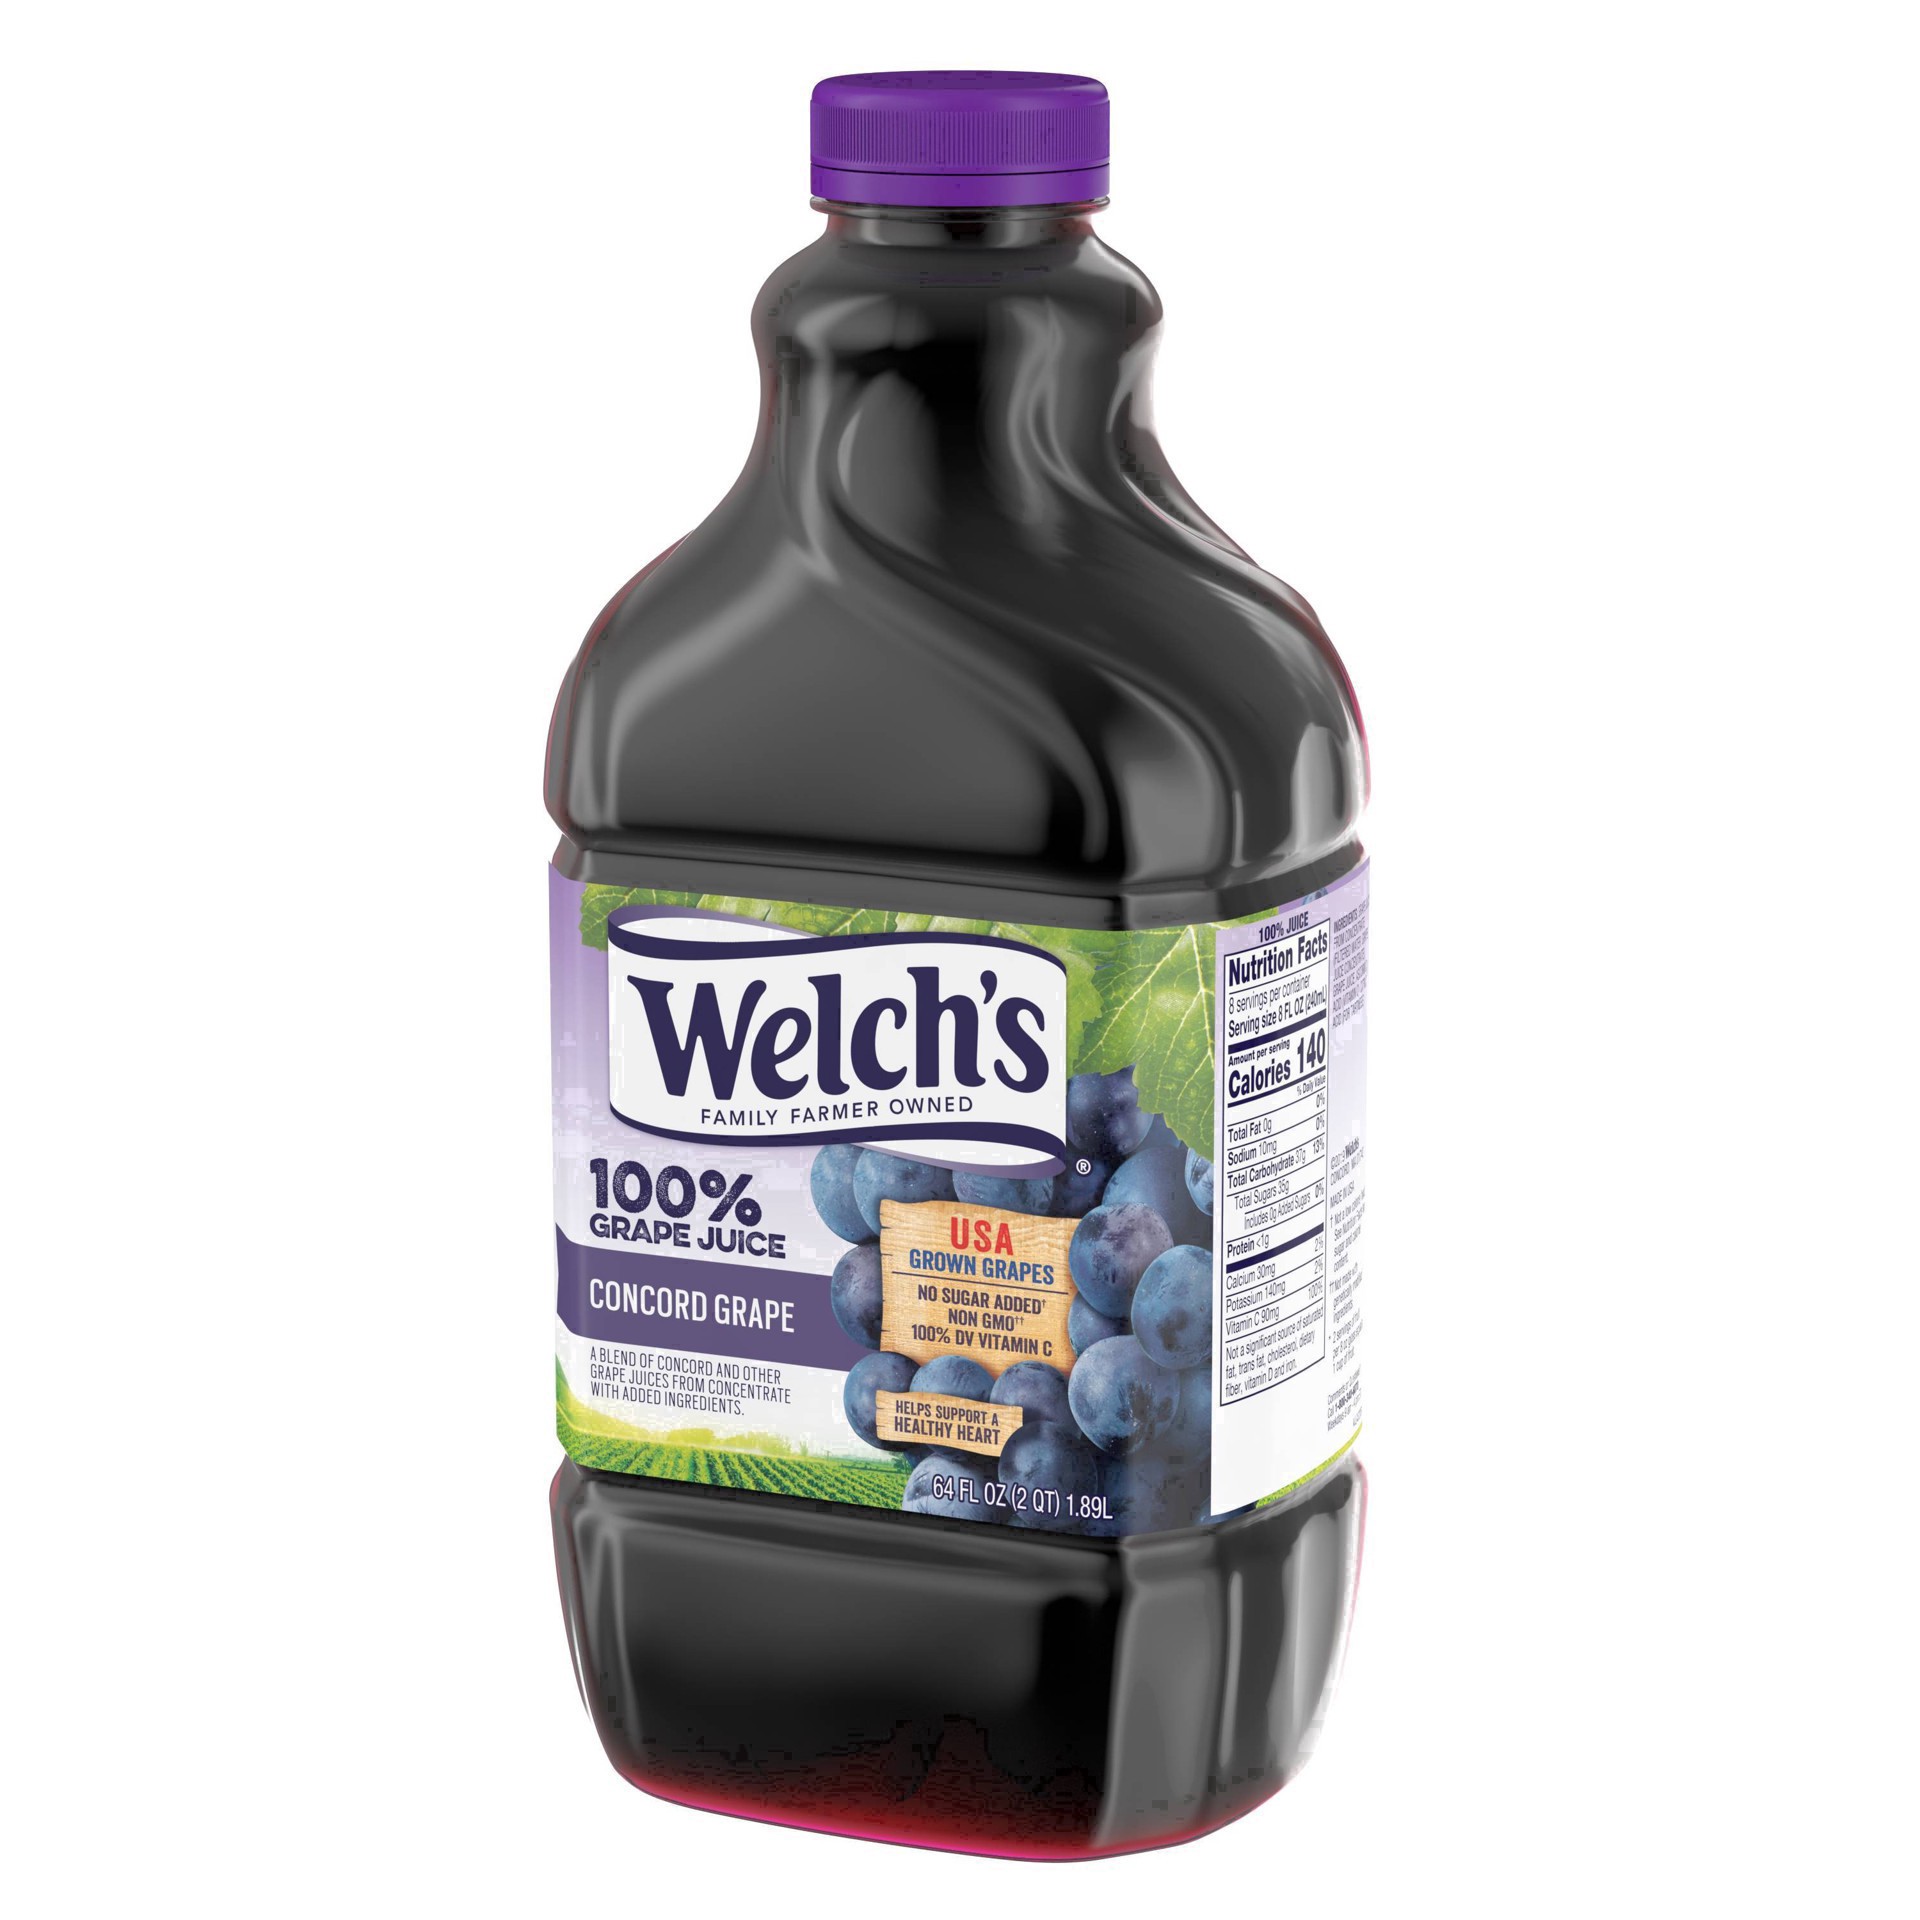 slide 29 of 70, Welch's 100% Concord Grape Juice, 64 oz